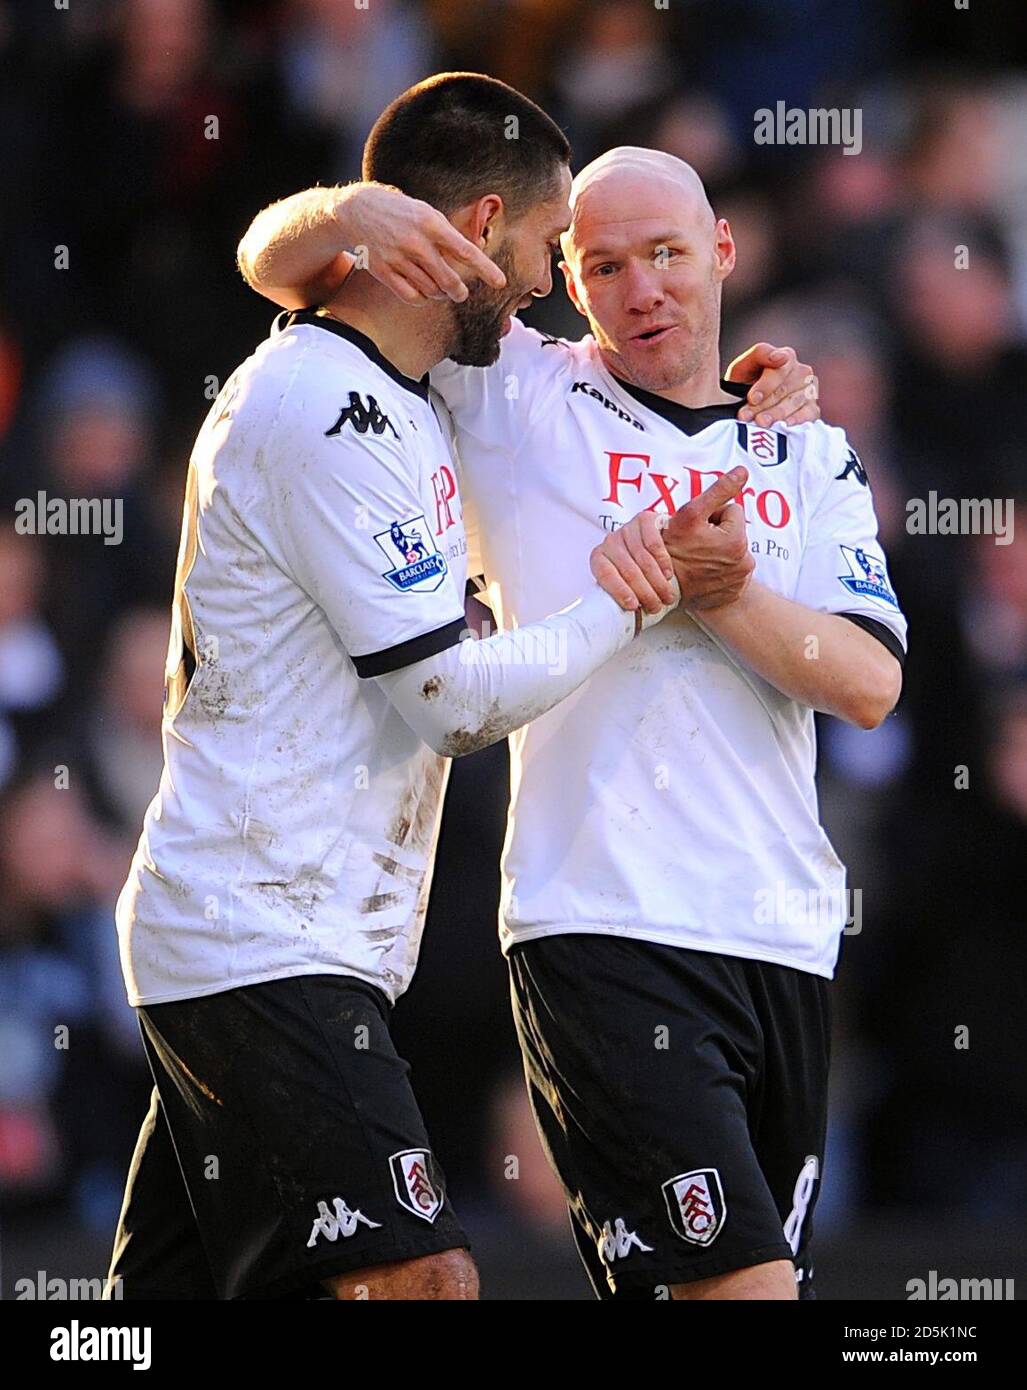 Fulham's Clint Dempsey (left) celebrates with team mate Andrew Johnson after scoring his side's first goal of the game Stock Photo